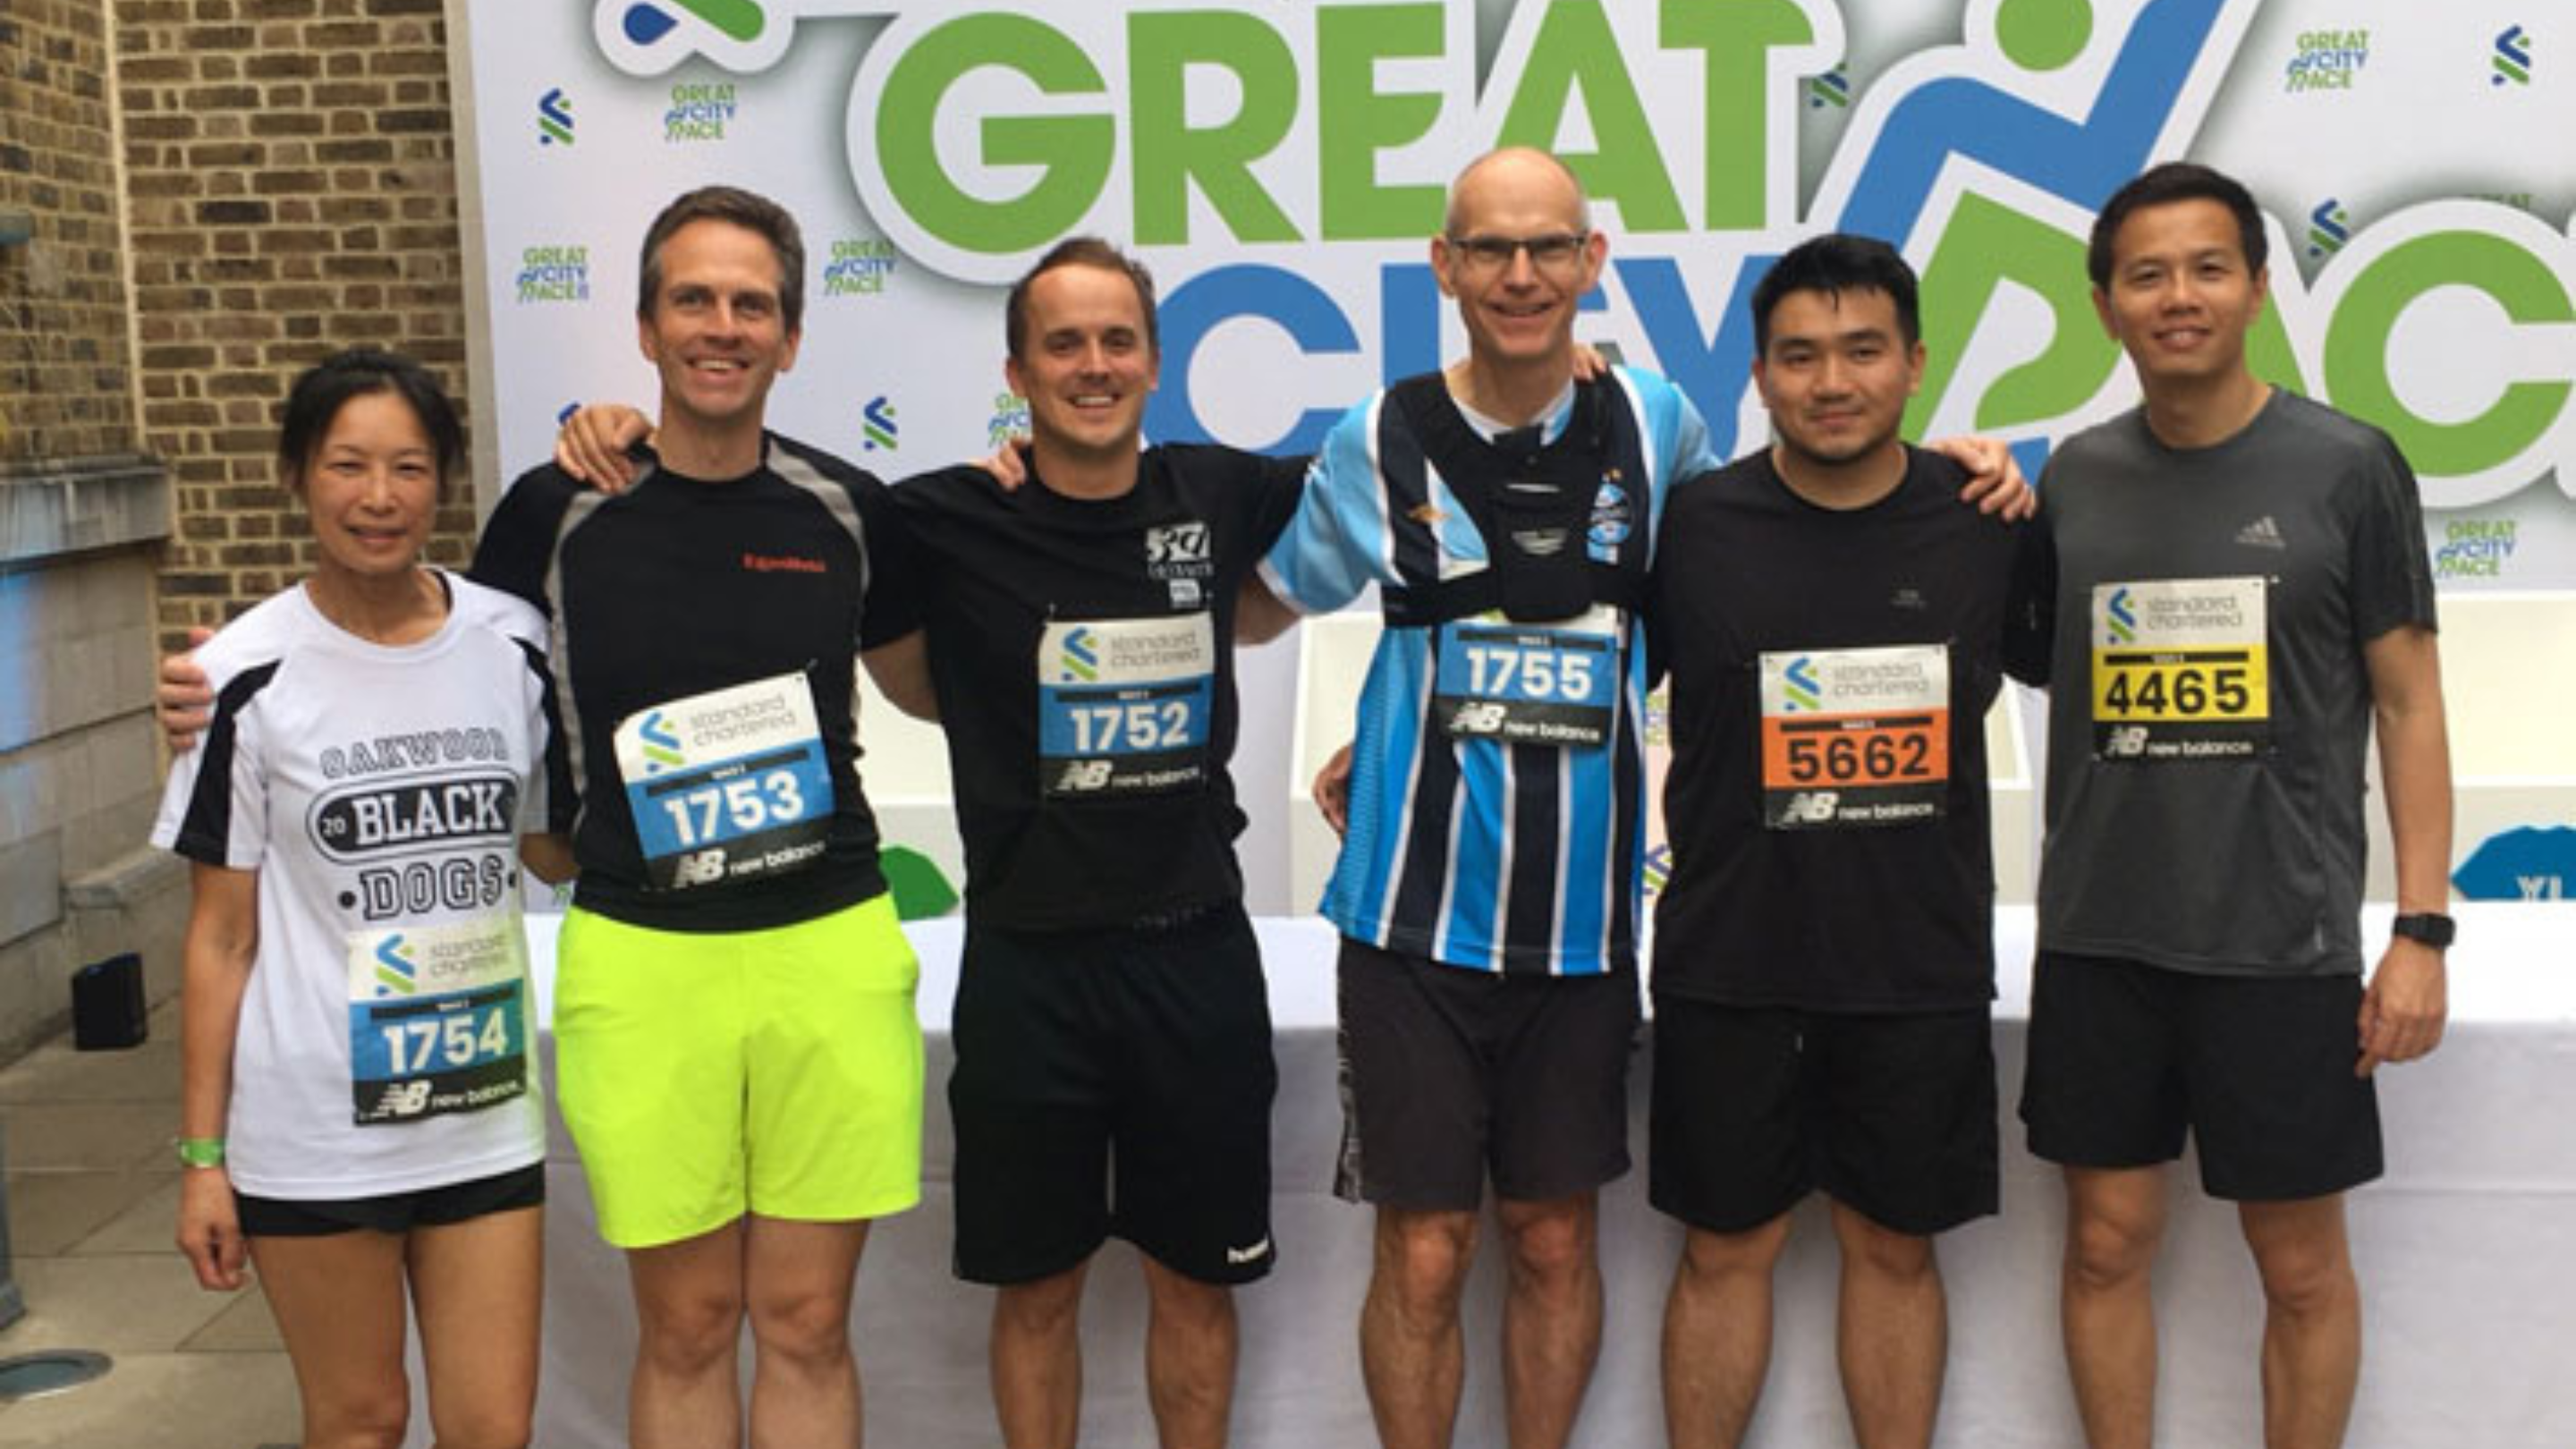 Seven complete 5K City Race for charity